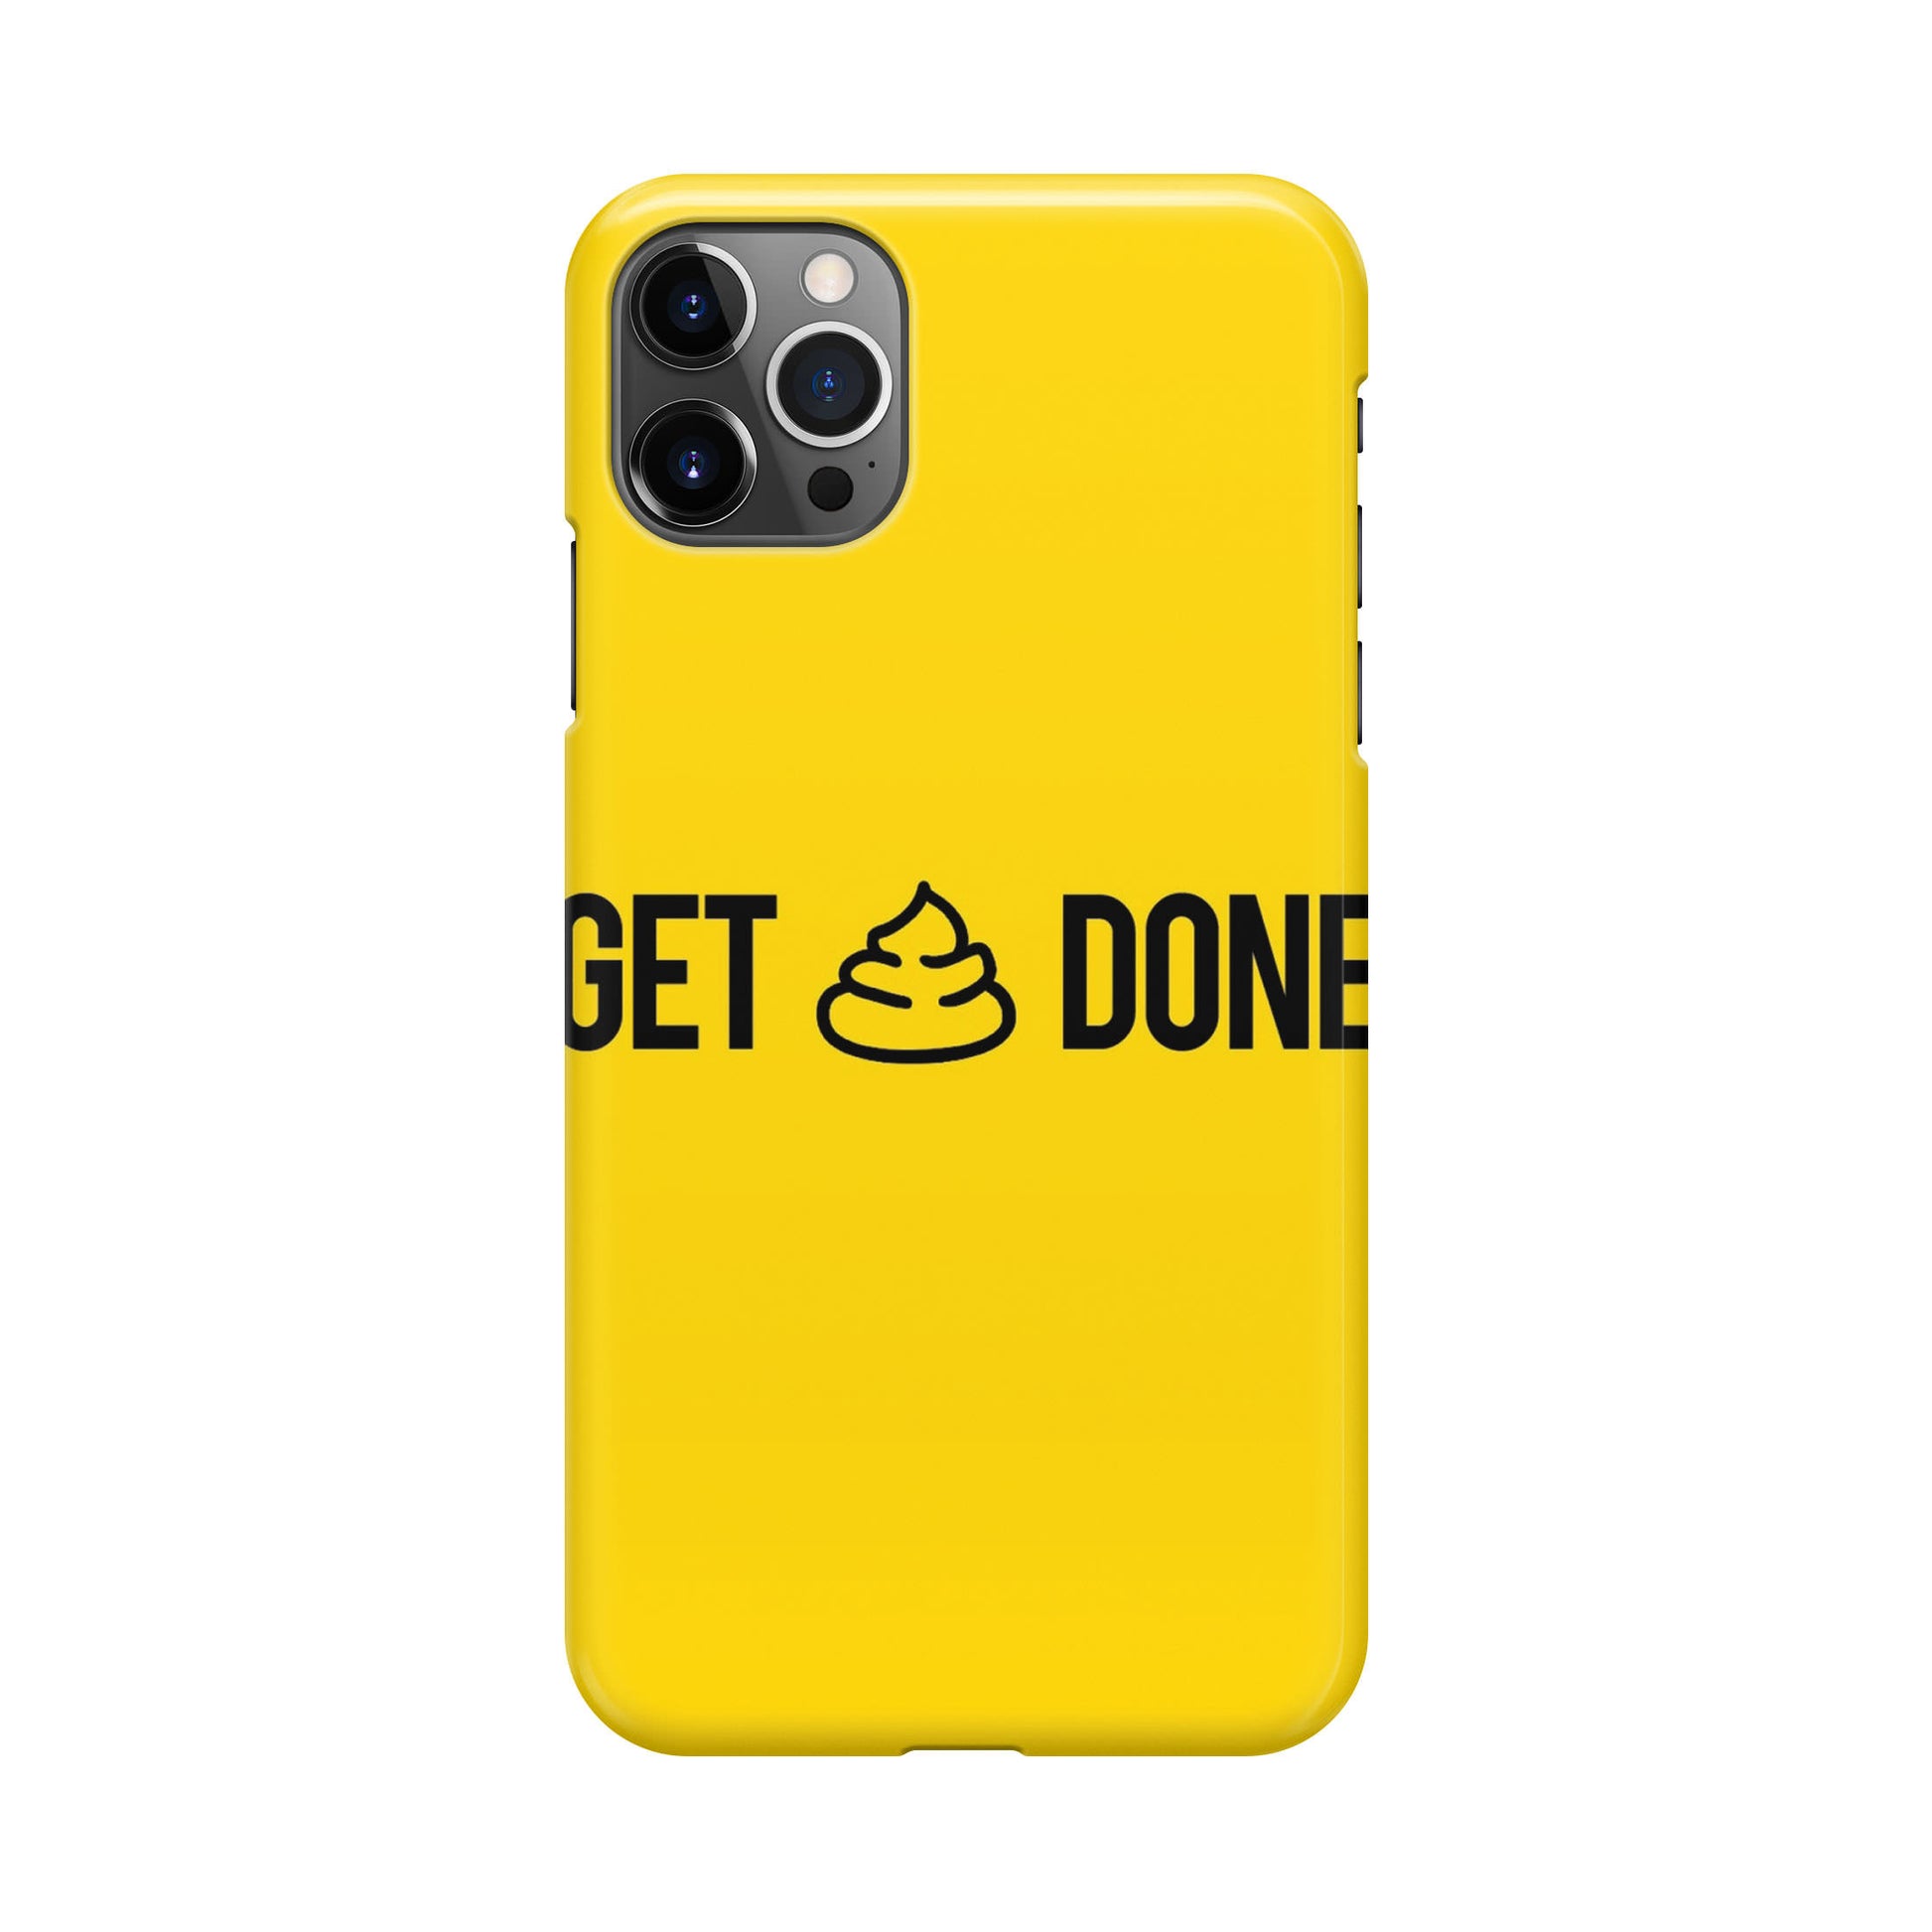 Get Shit Done iPhone 12 Pro Case